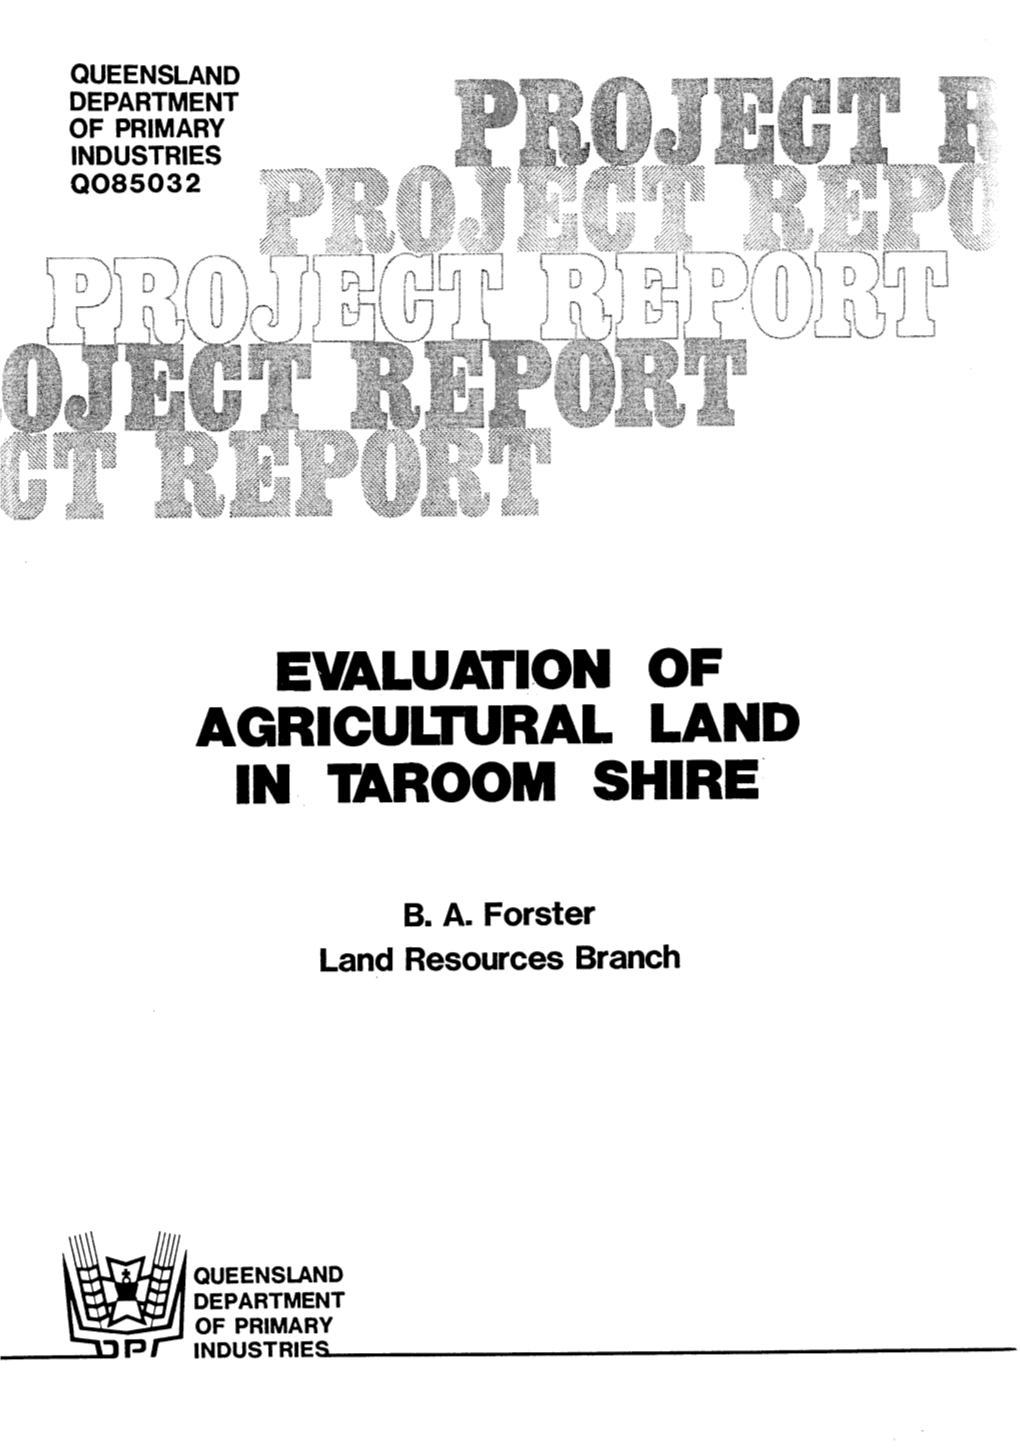 Evaluation of Agricultural Land in Taroom Shire